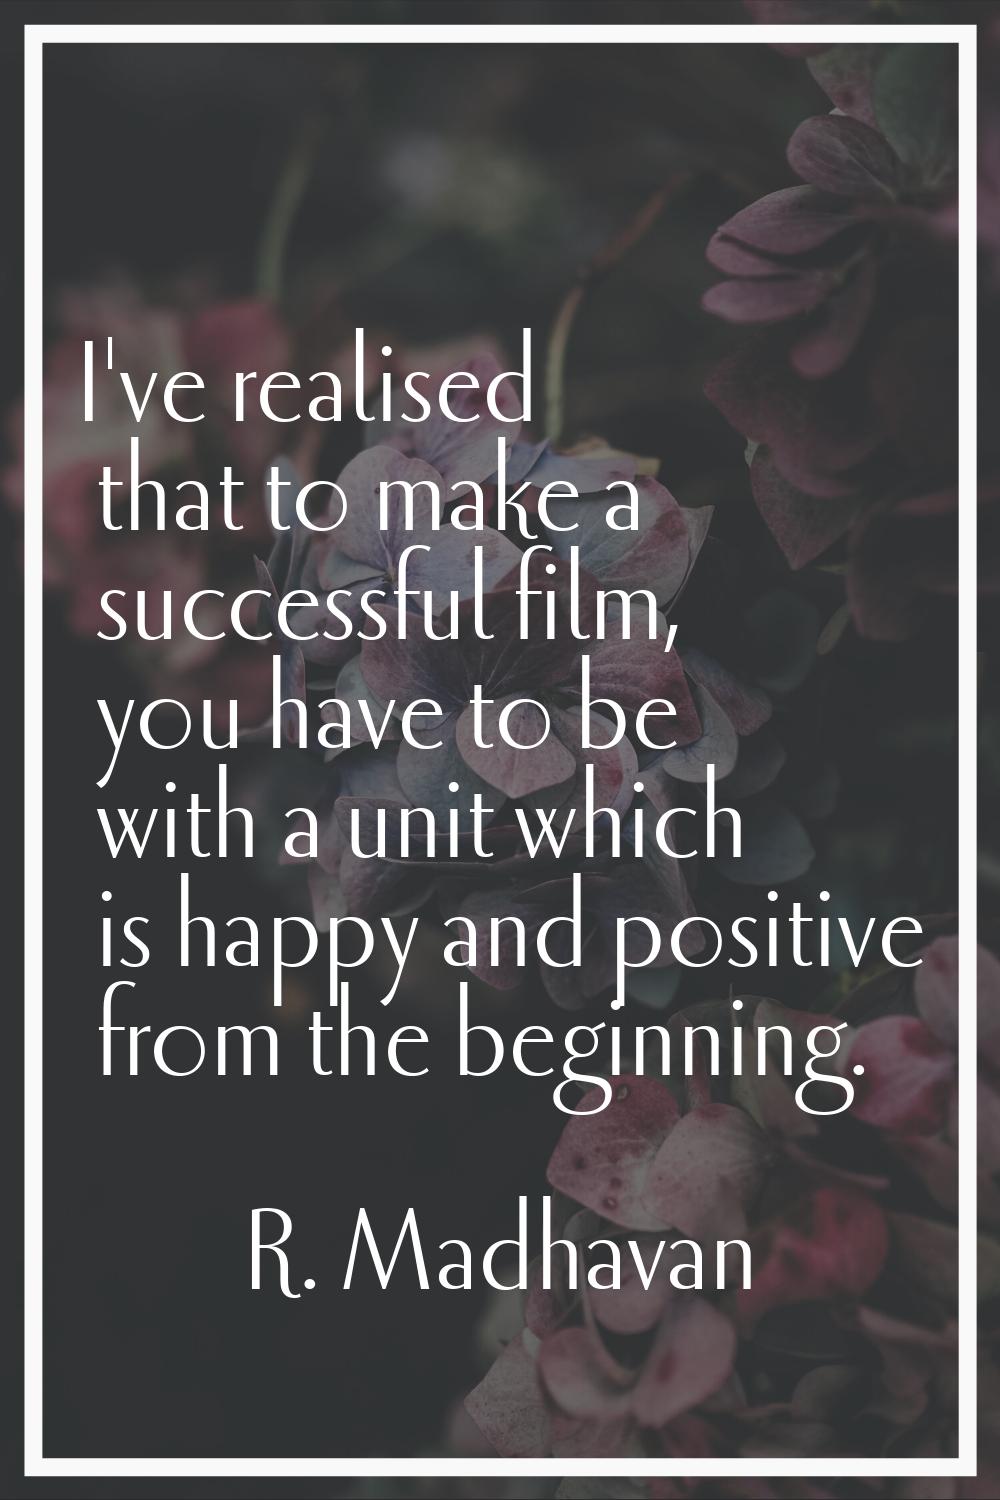 I've realised that to make a successful film, you have to be with a unit which is happy and positiv